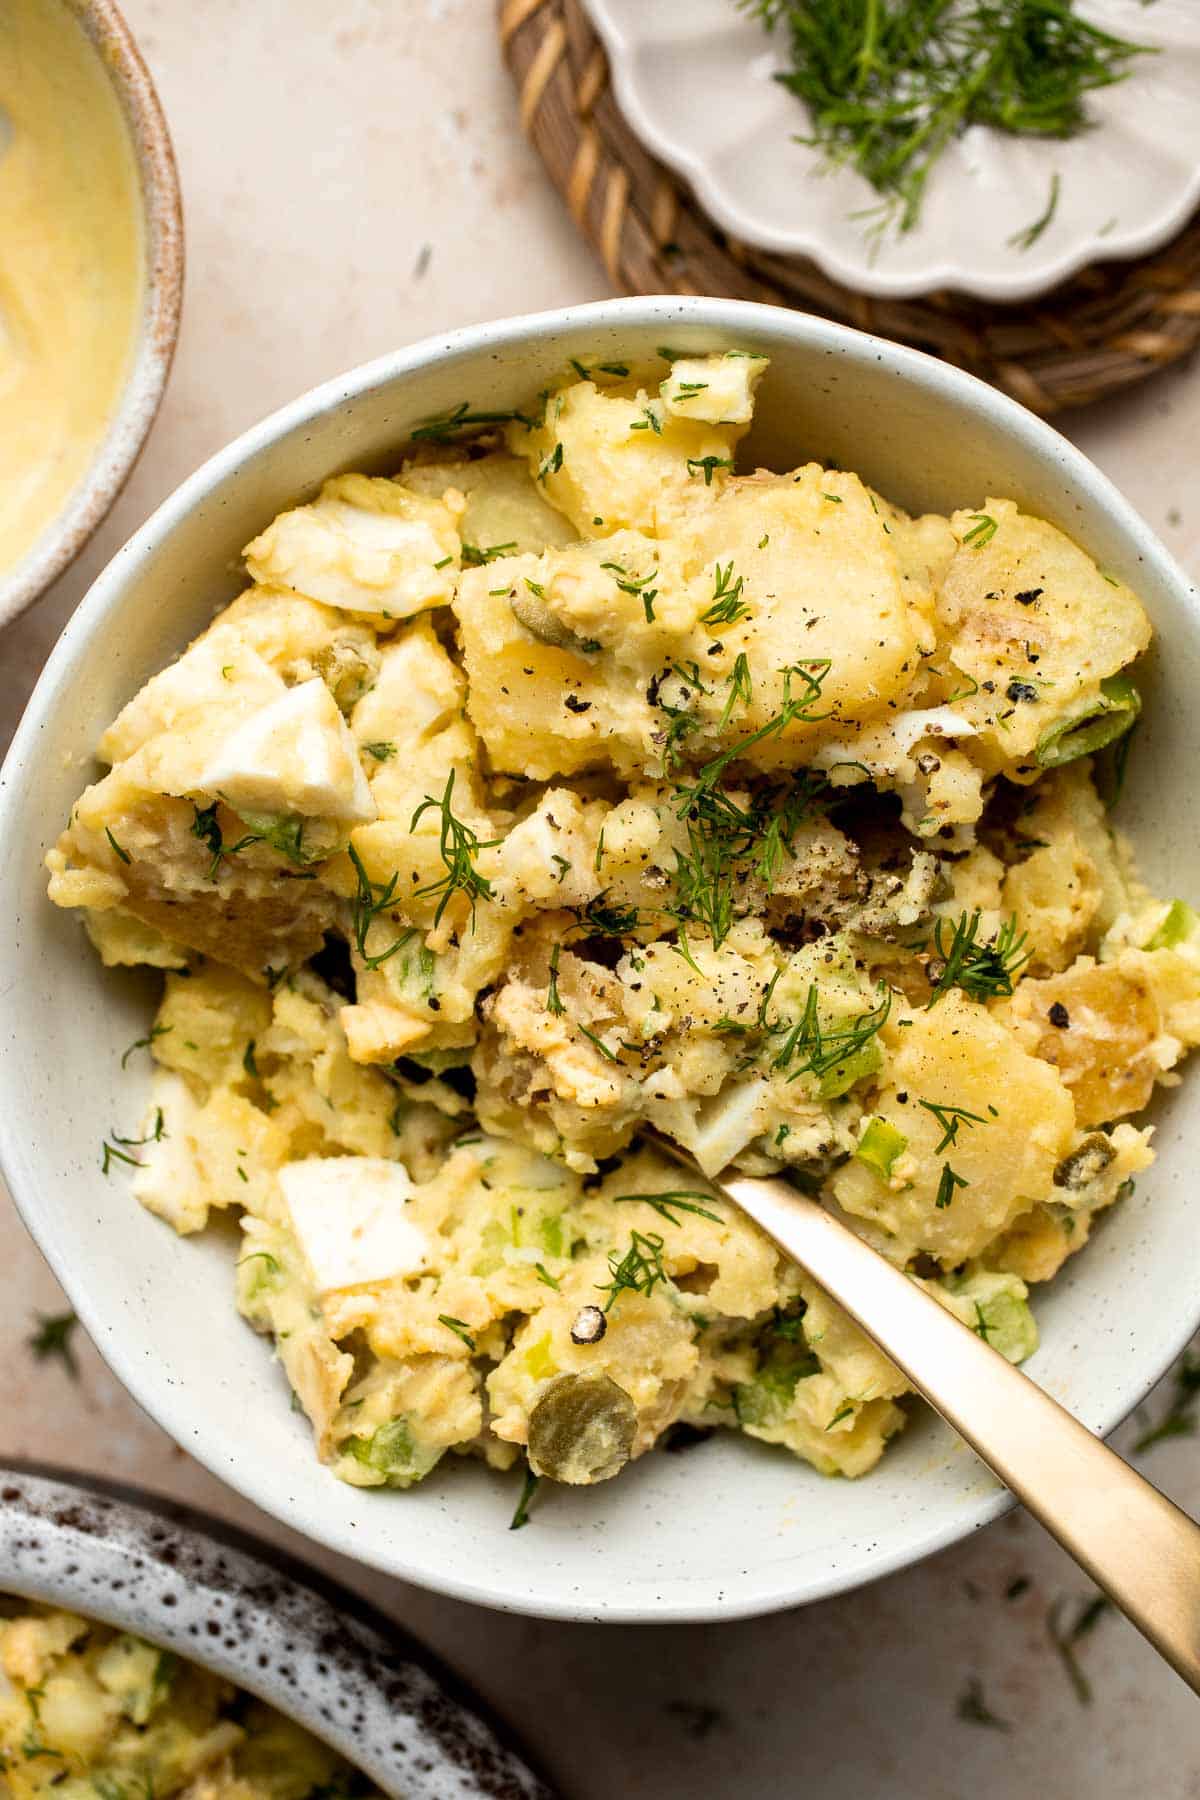 Classic Potato Salad is tangy and creamy with chunks of fluffy potatoes, soft eggs, and crunchy vegetables. It’s a perfect, quick and easy summer side dish. | aheadofthyme.com